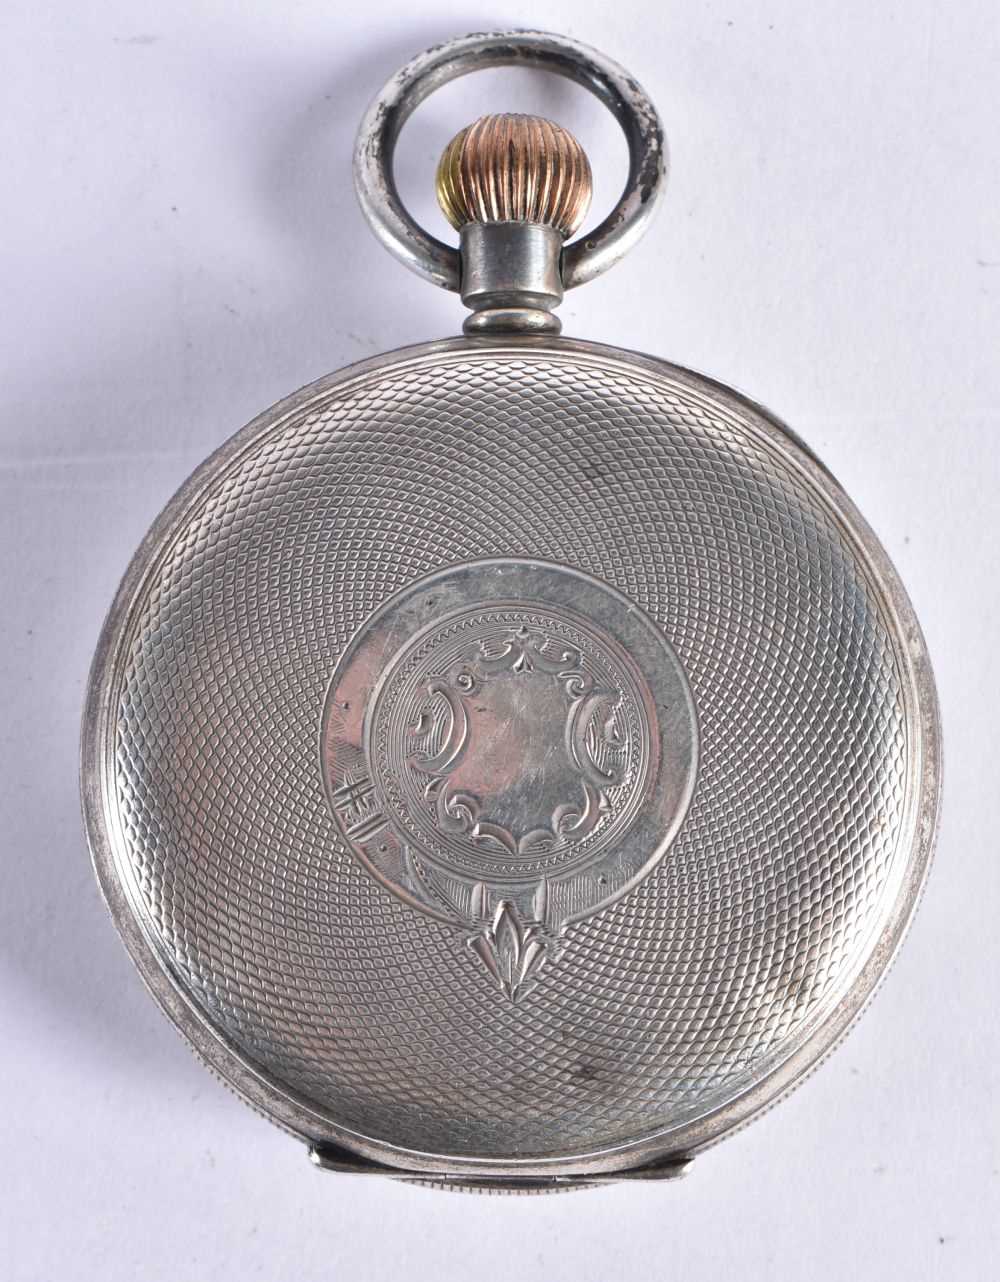 SPIKINS FROM DENT Sterling Silver Gents Open Face Pocket Watch. Stamped 925.  Movement - Hand-wind. - Image 4 of 4